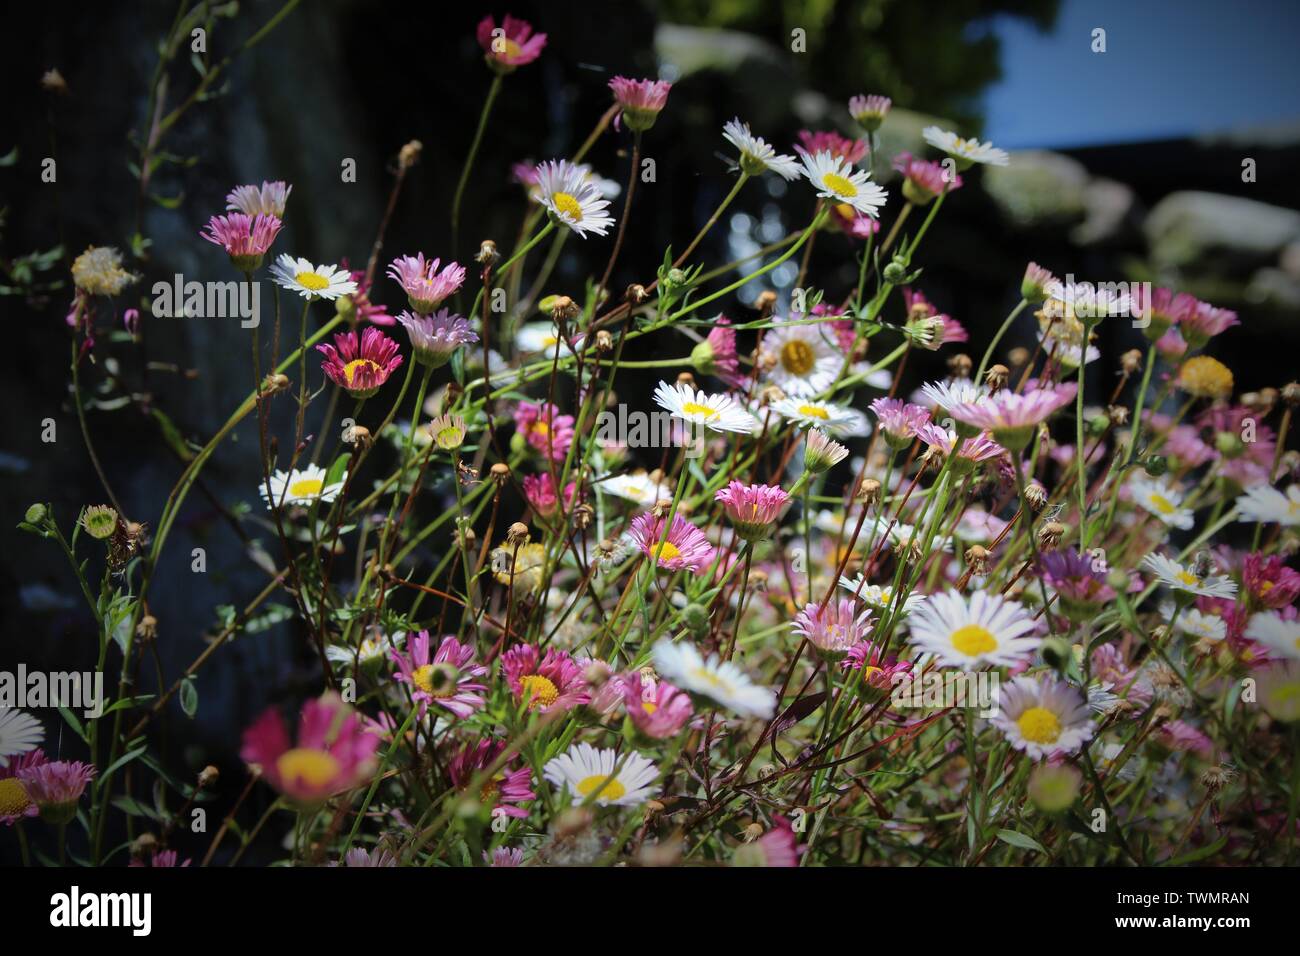 Daisies in a bunch, growing in a basket, Godshill, Isle of Wight,UK. Stock Photo